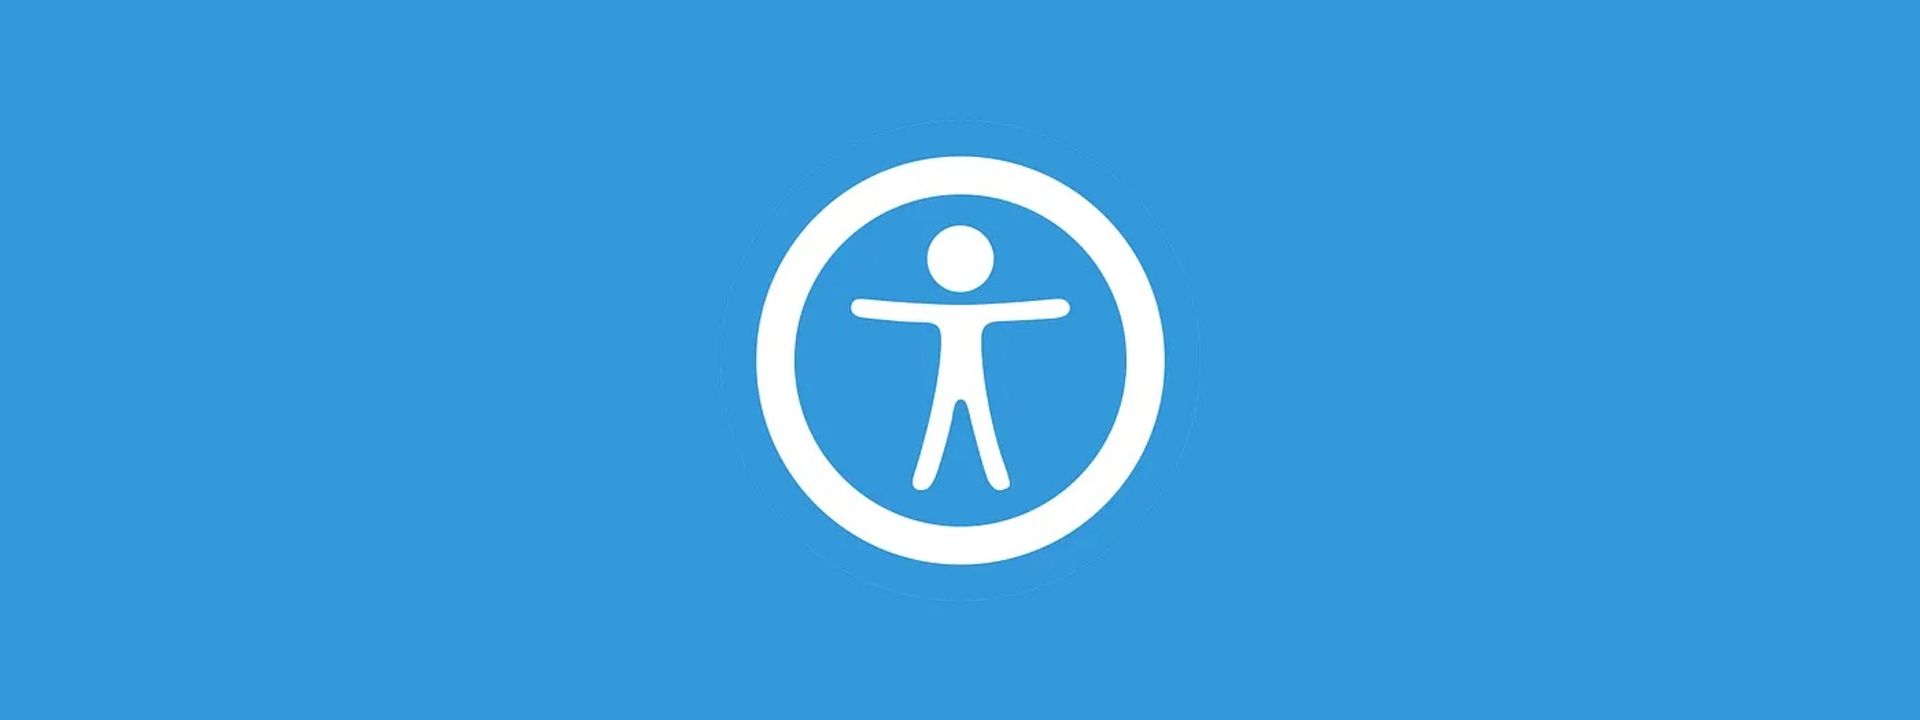 Accessibility icon in blue